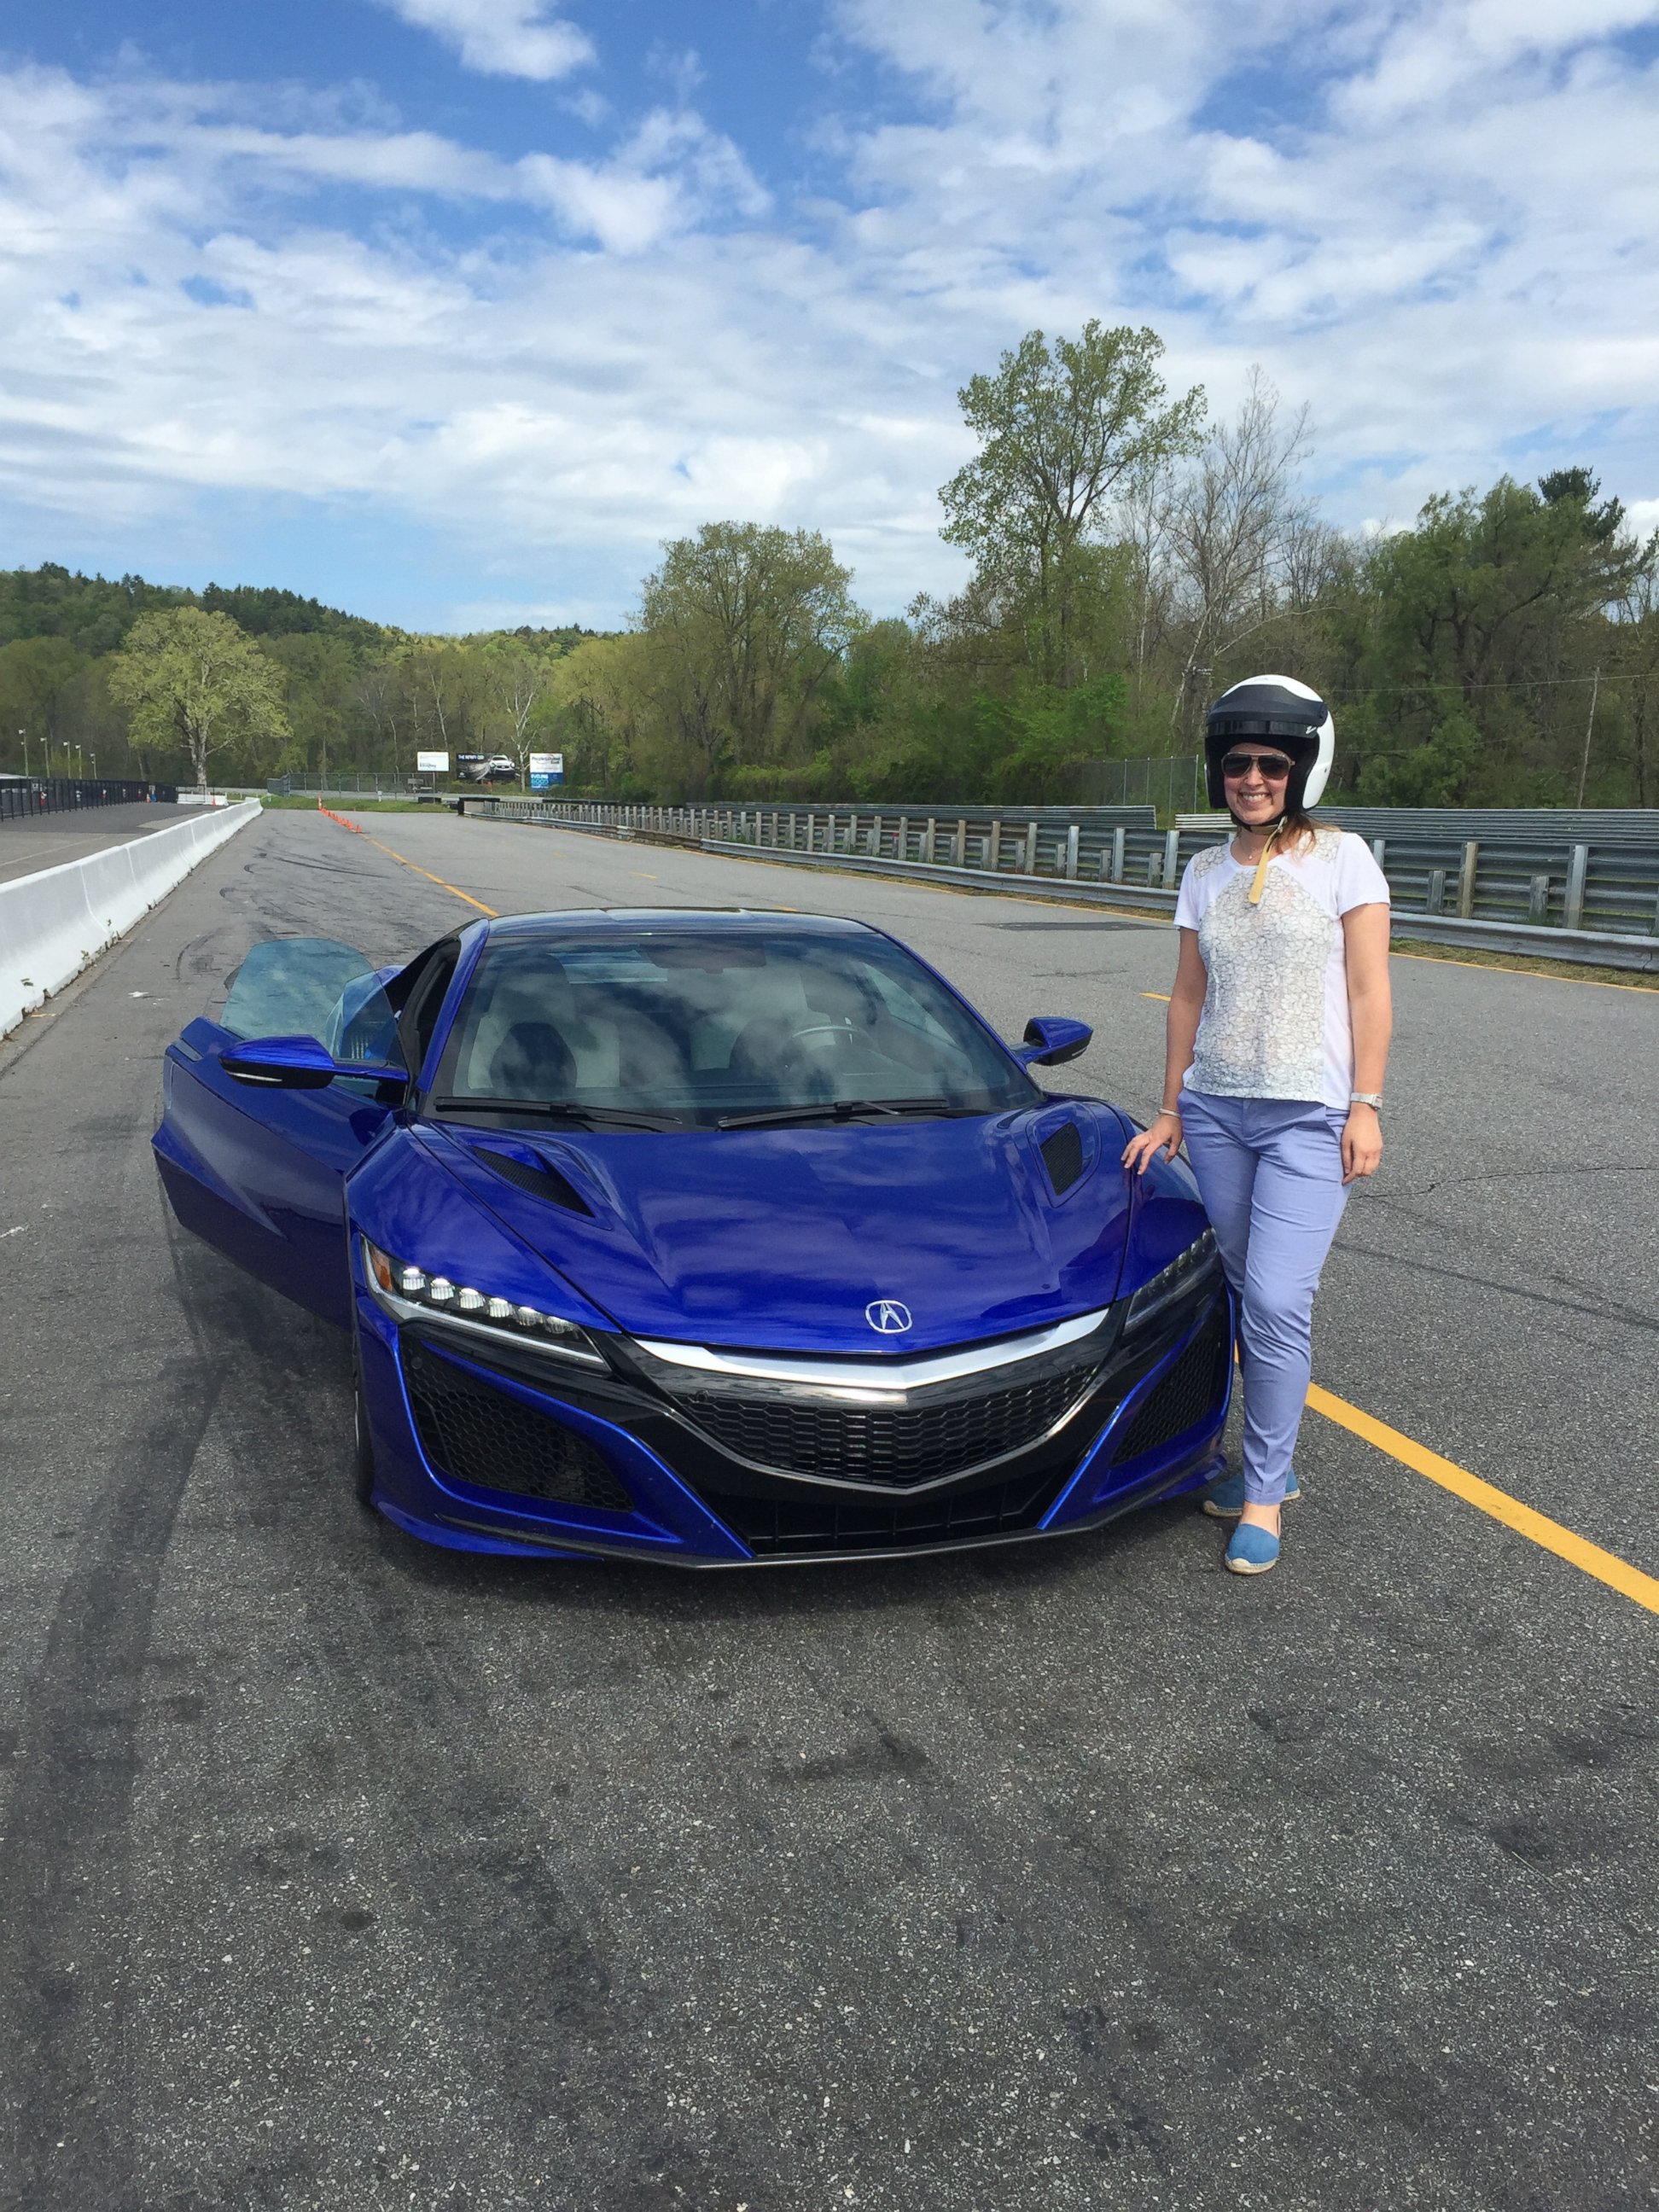 PHOTO: Reporter Morgan Korn is about to test-drive the $156,000 Acura NSX "supercar" at Lime Rock Park in Connecticut.